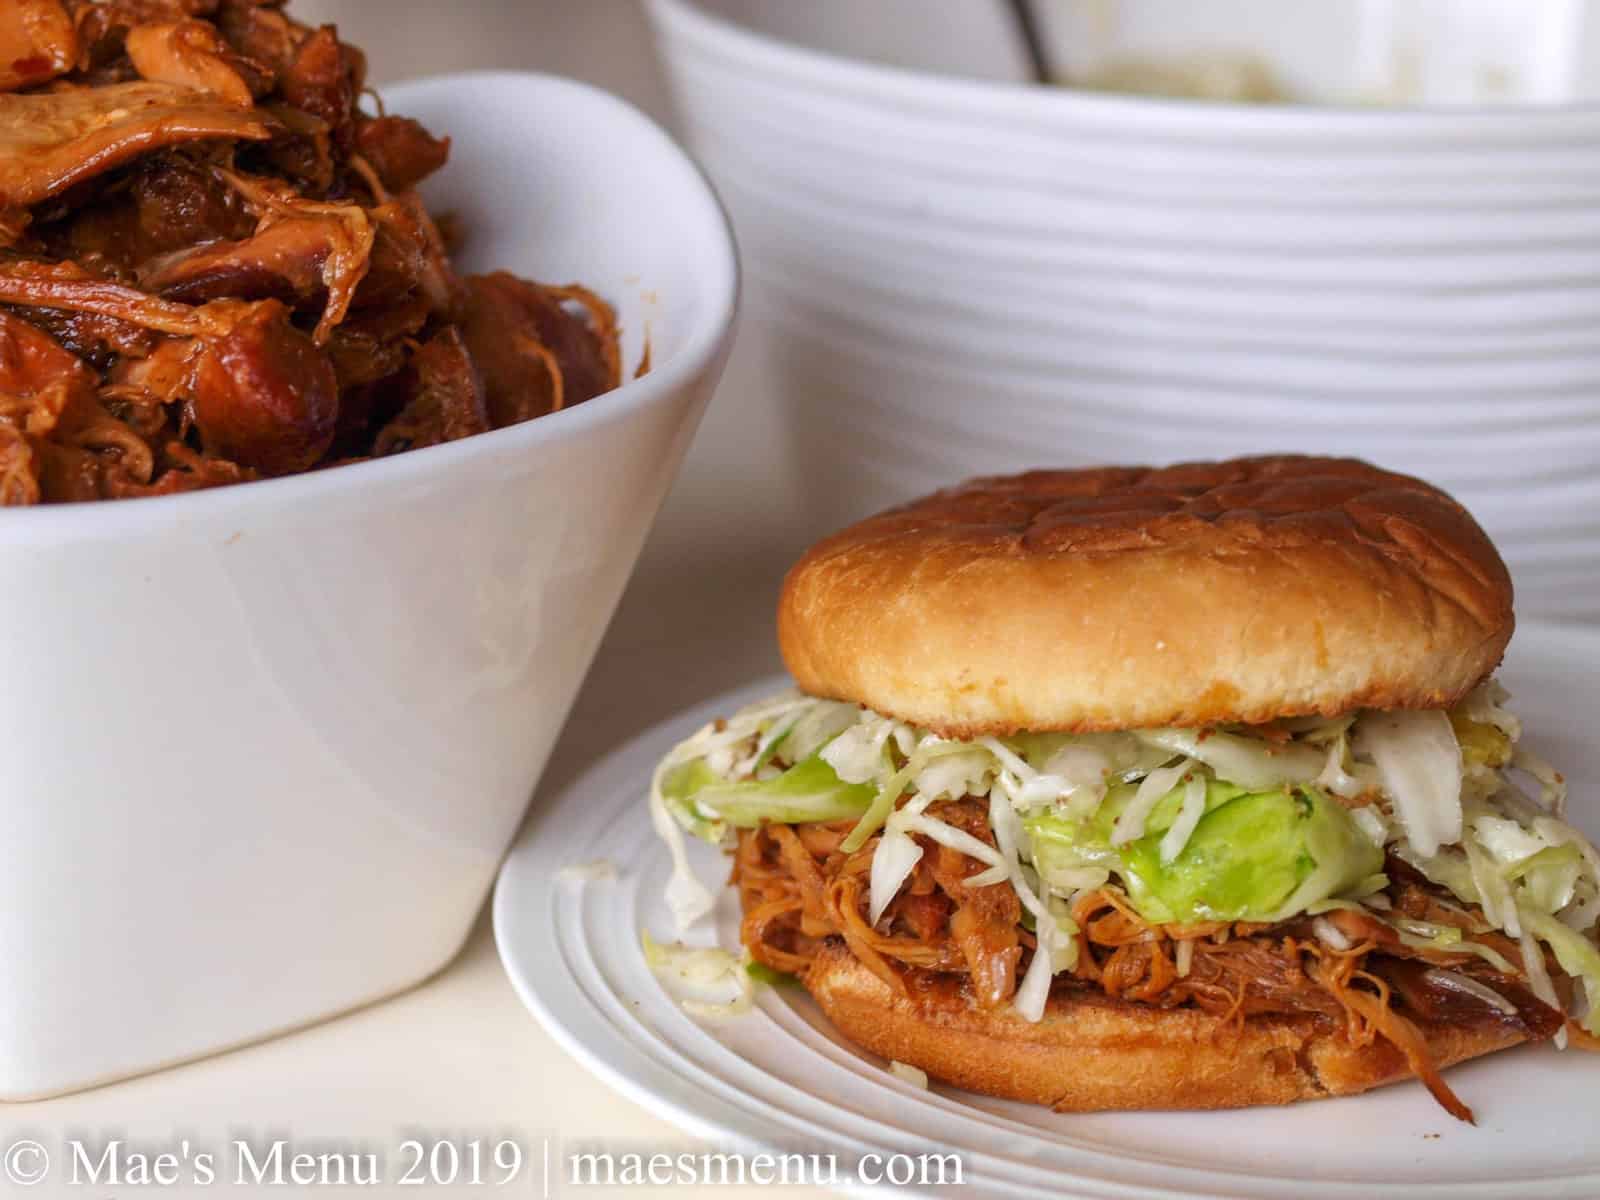 Honey BBQ shredded chicken sandwich on a white plate next to a bowl of bbq chicken.